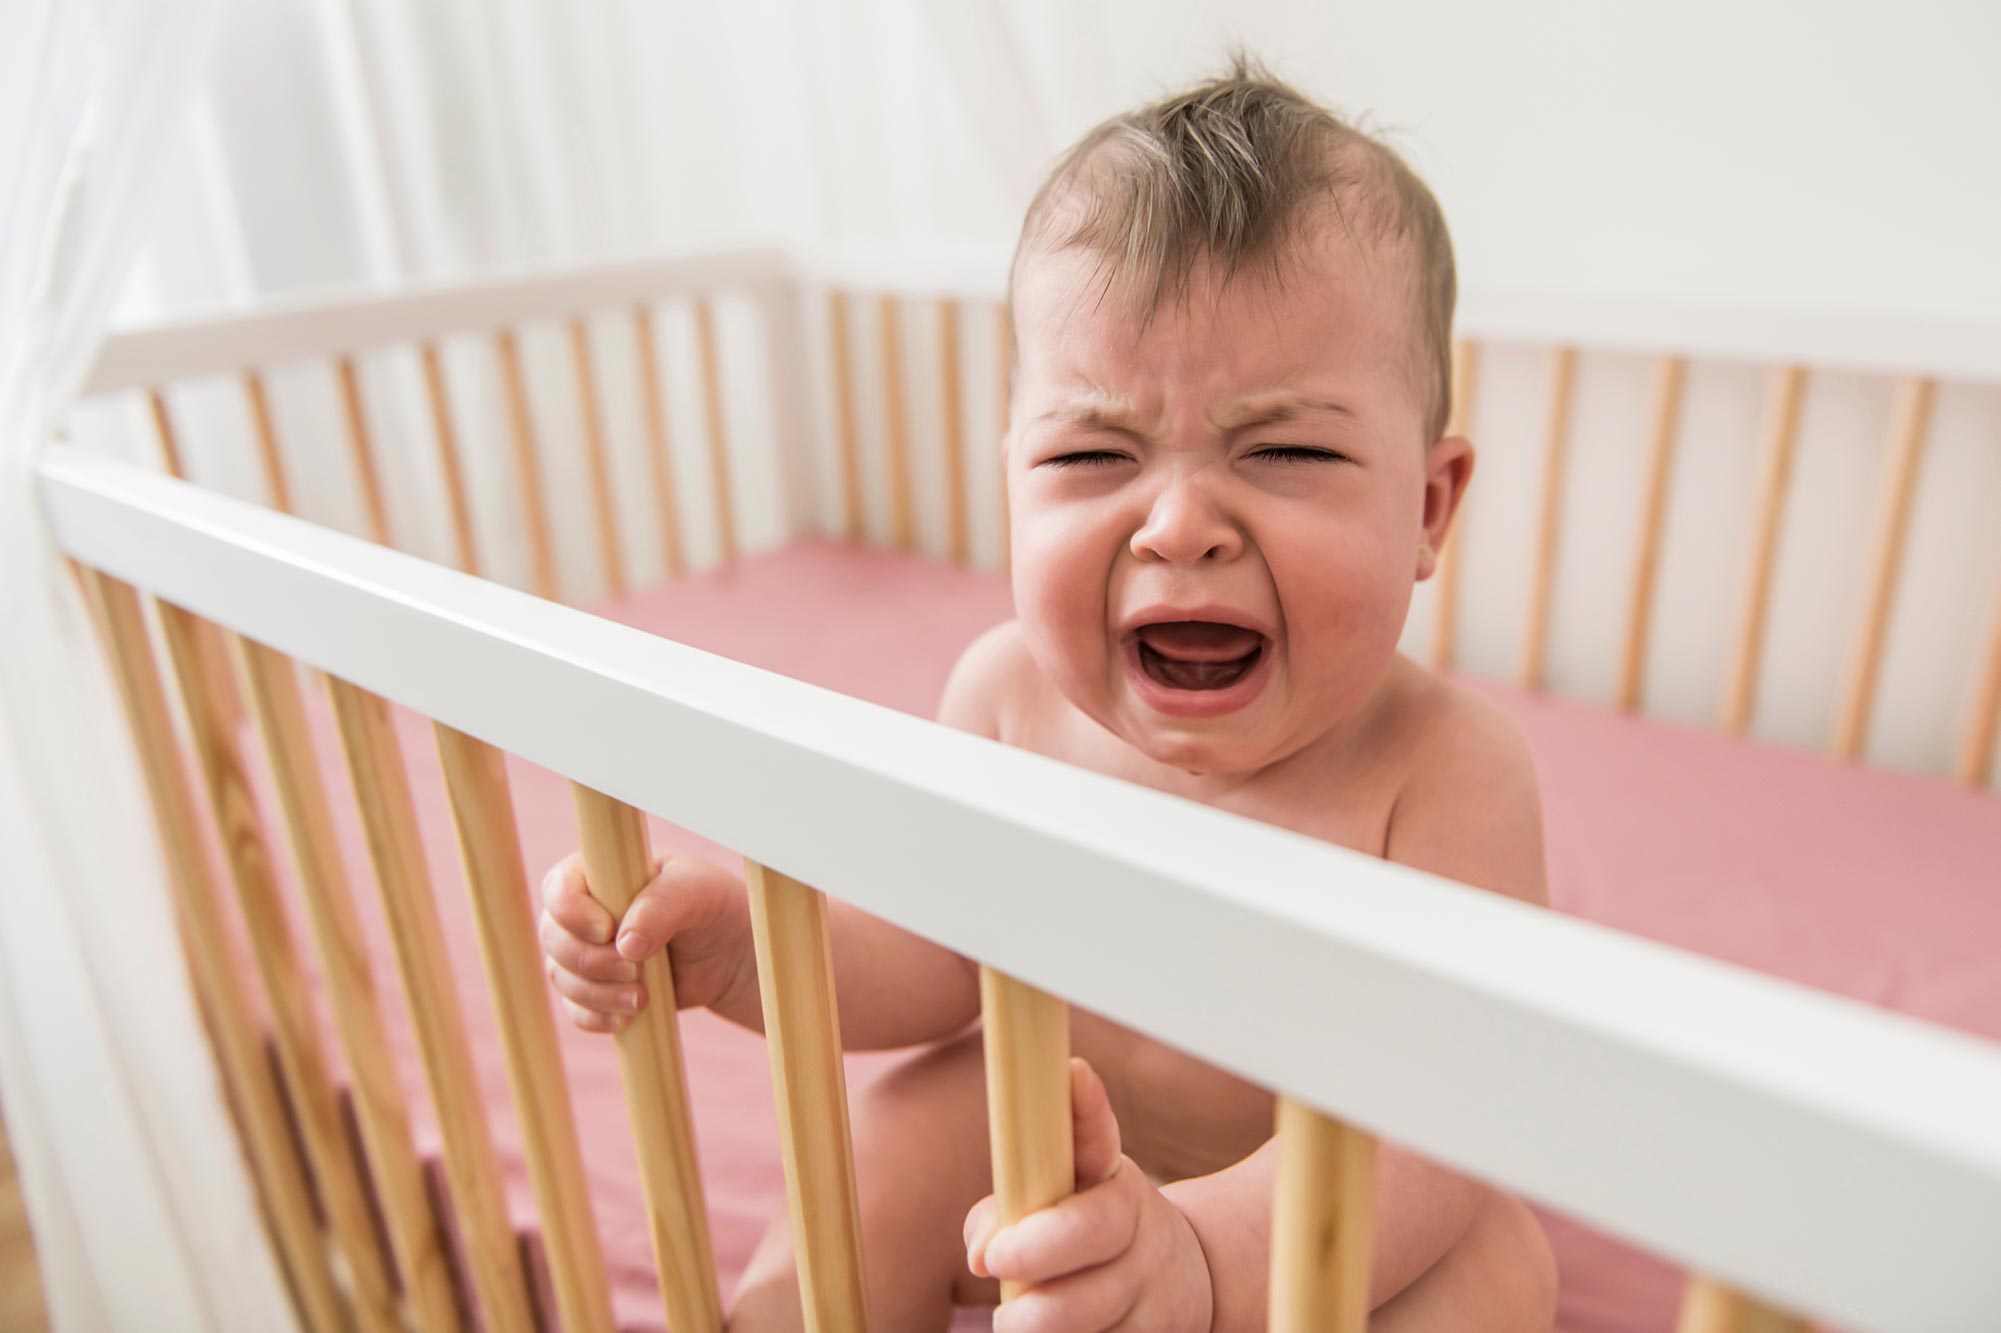 infant in crib, crying